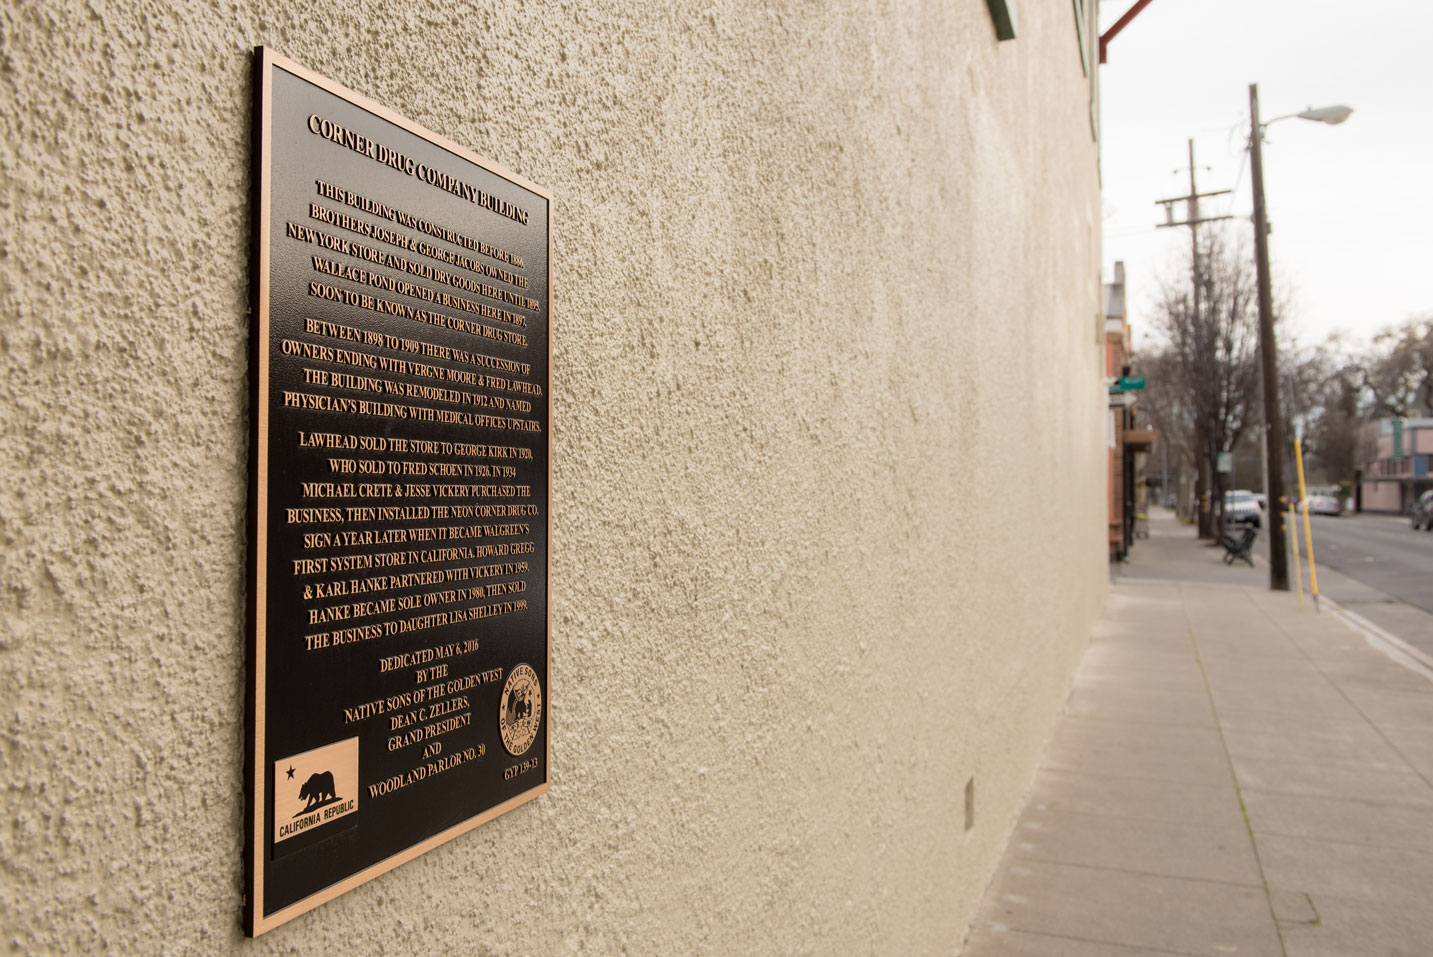 A photograph of the plaque outside of Corner Drug in Woodland CA